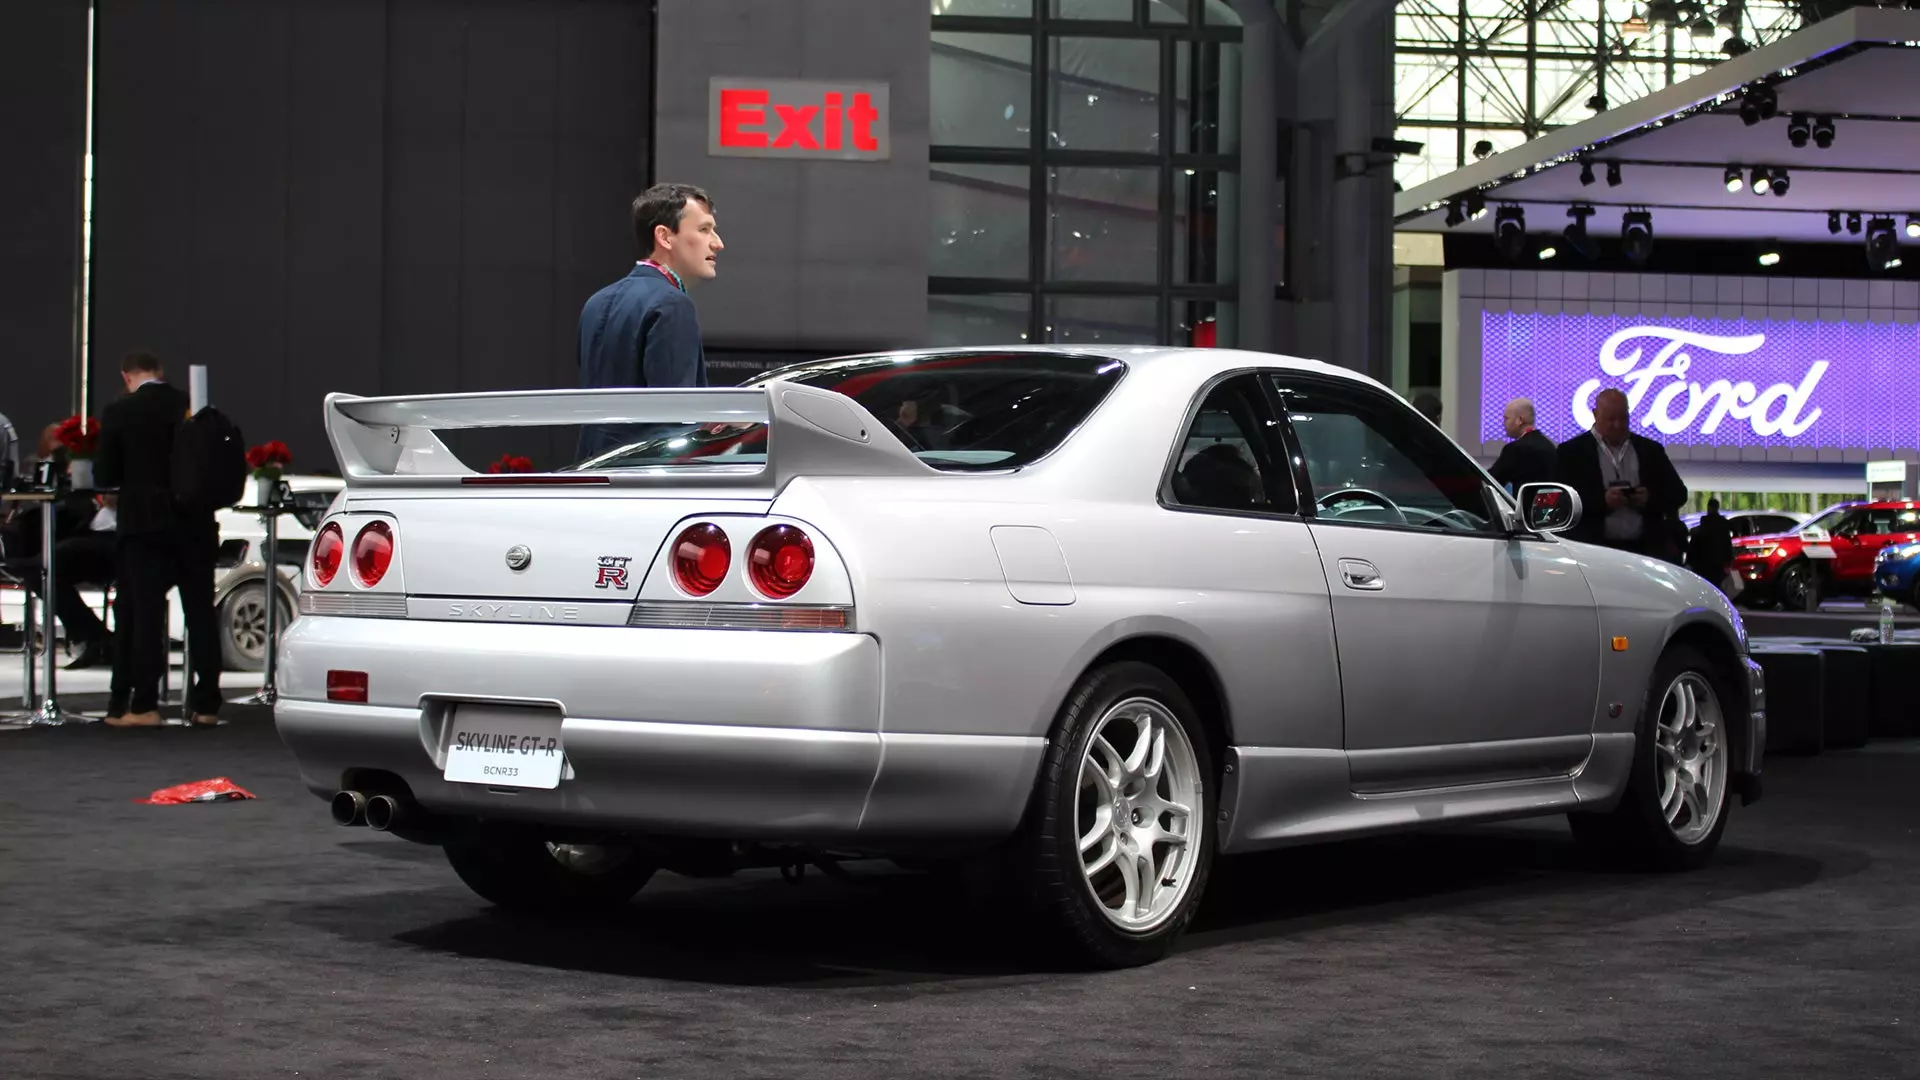 An R33 Nissan Skyline in America Is Cause for Pause | Autance